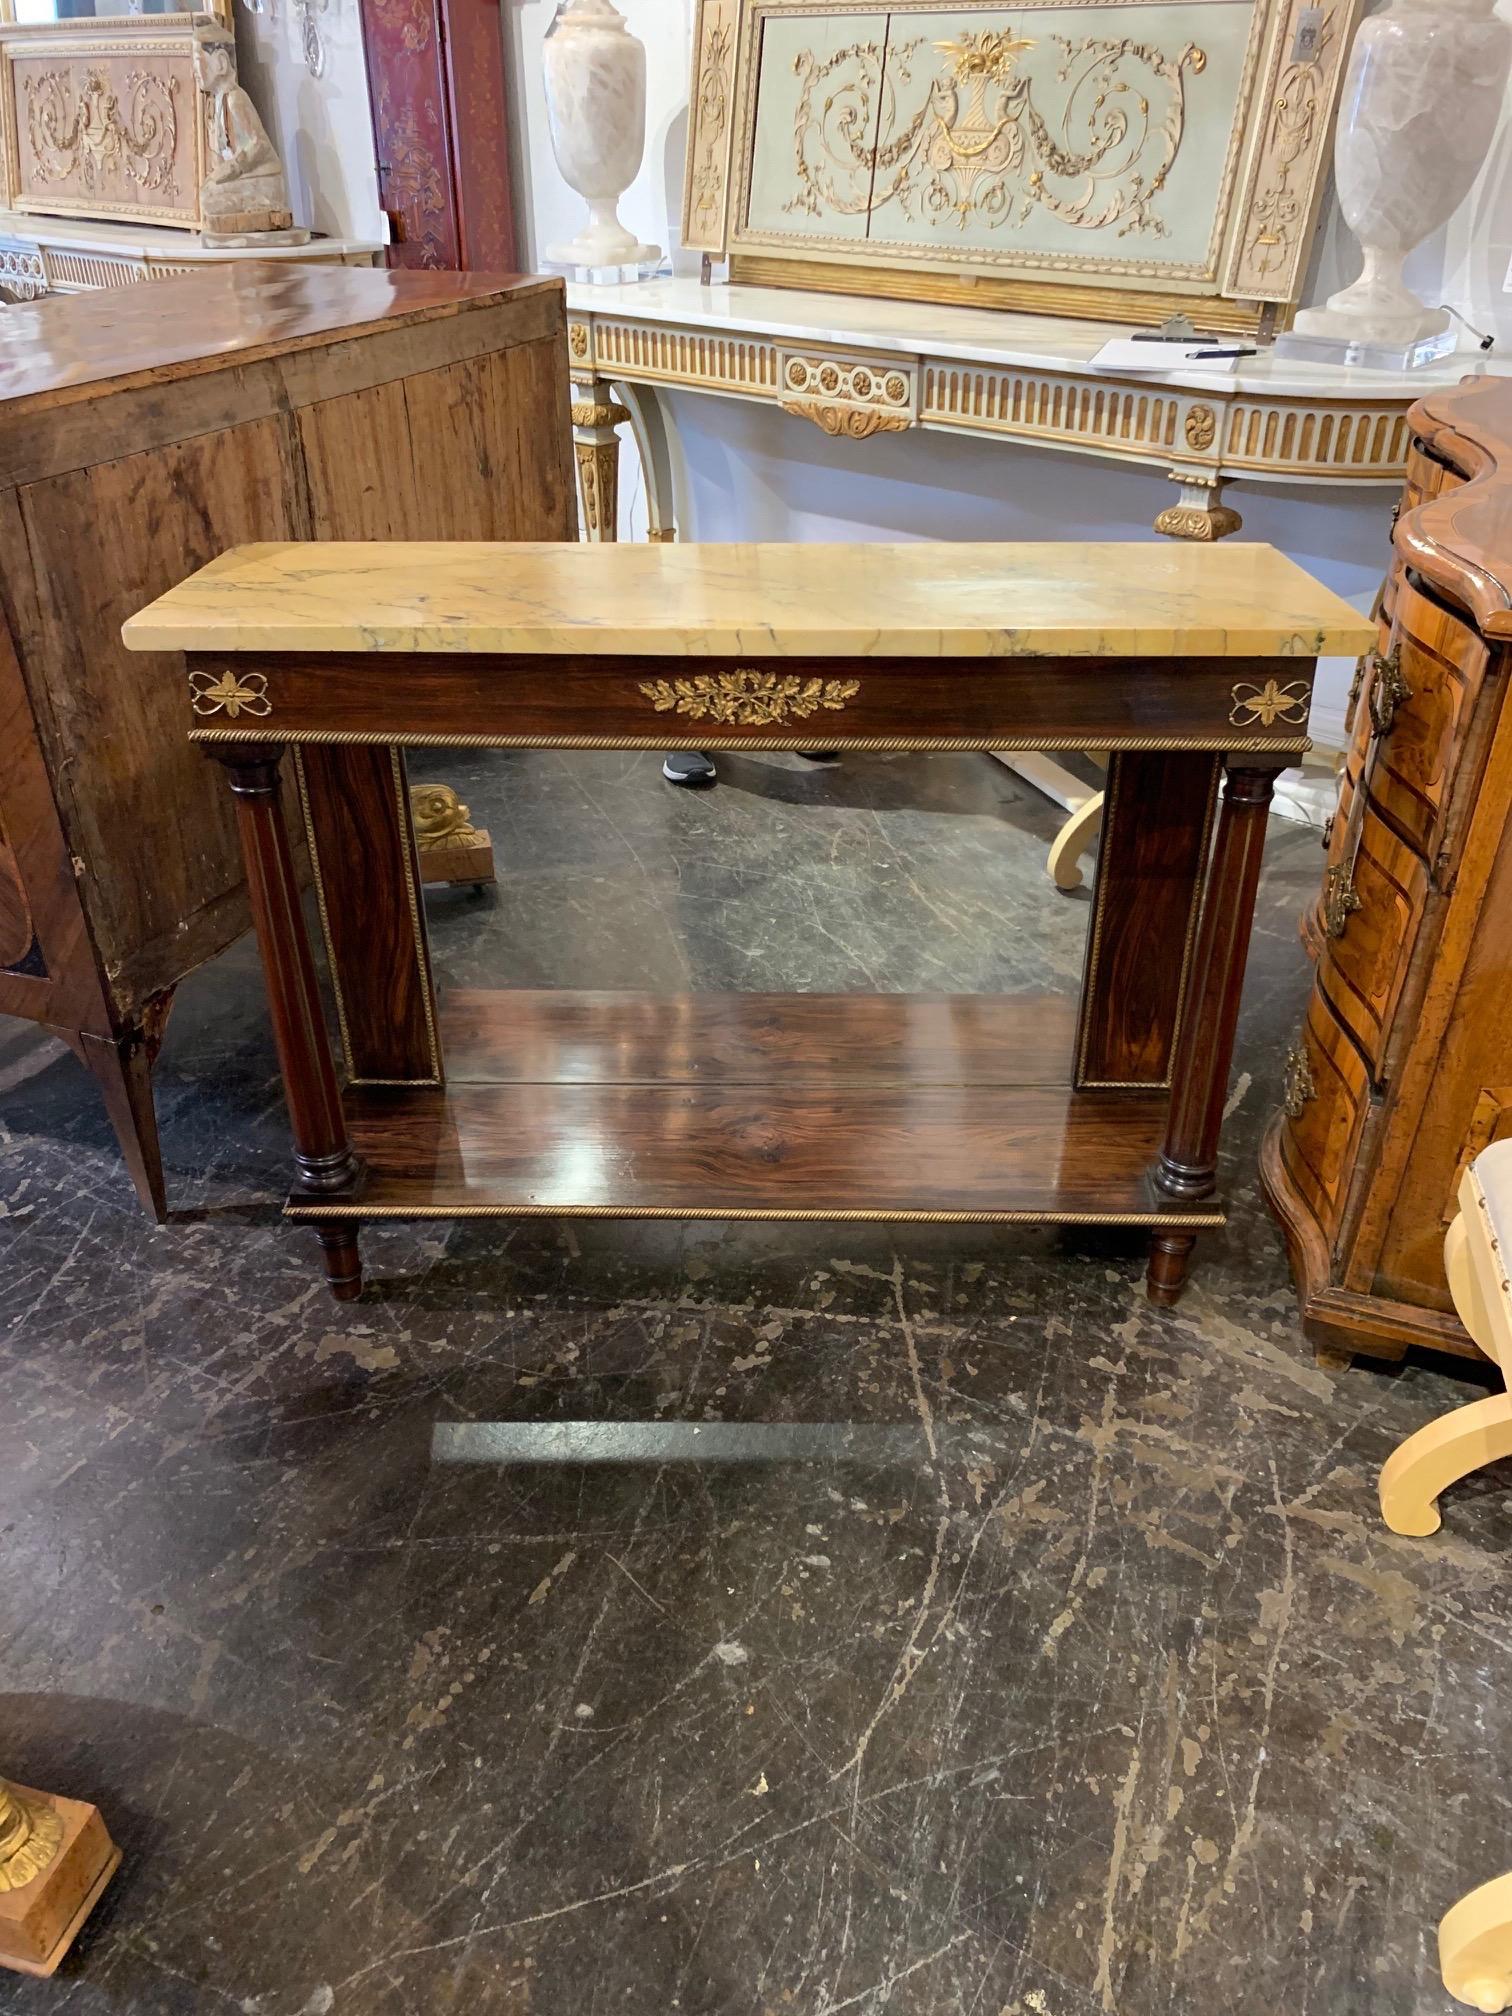 Elegant 19th century French Empire rosewood console with a gorgeous Sienna marble top. The piece has beautiful decorative details including brass trim and a mirrored base. Fabulous!